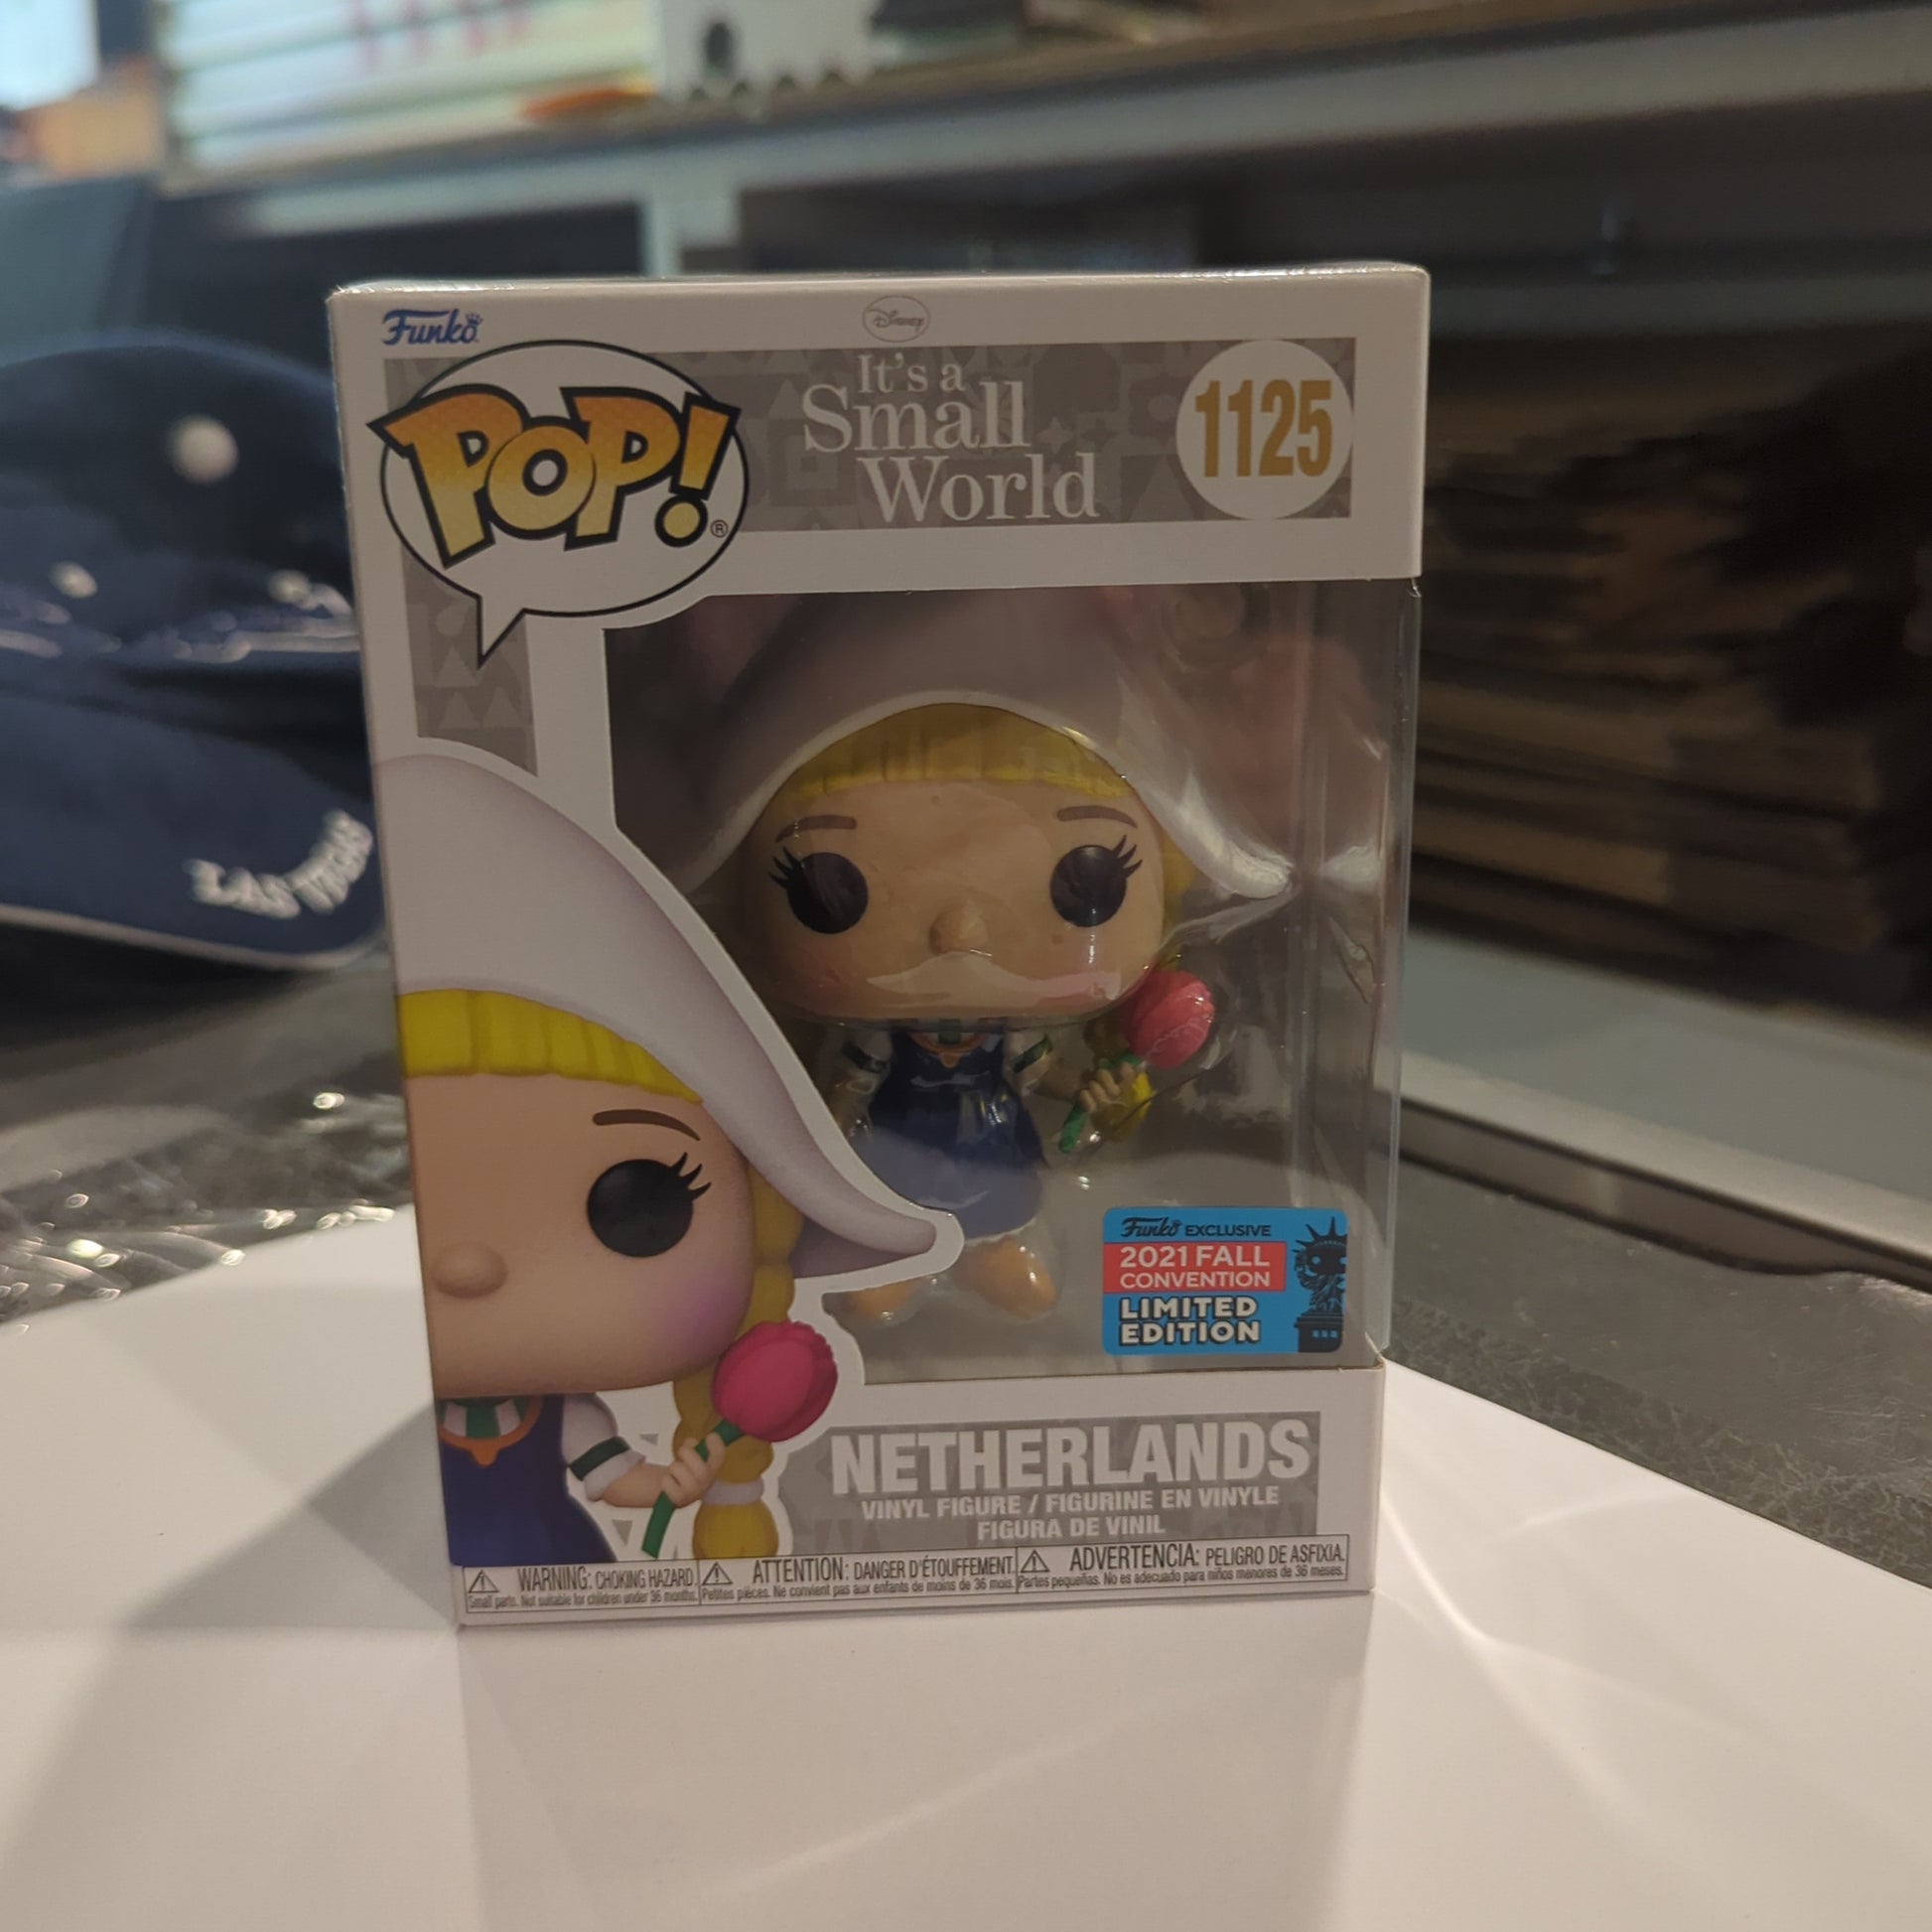 Disney Funko Pop - Netherlands - It's a Small World - NYCC Exclusive - No. 1125 FRENLY BRICKS - Open 7 Days